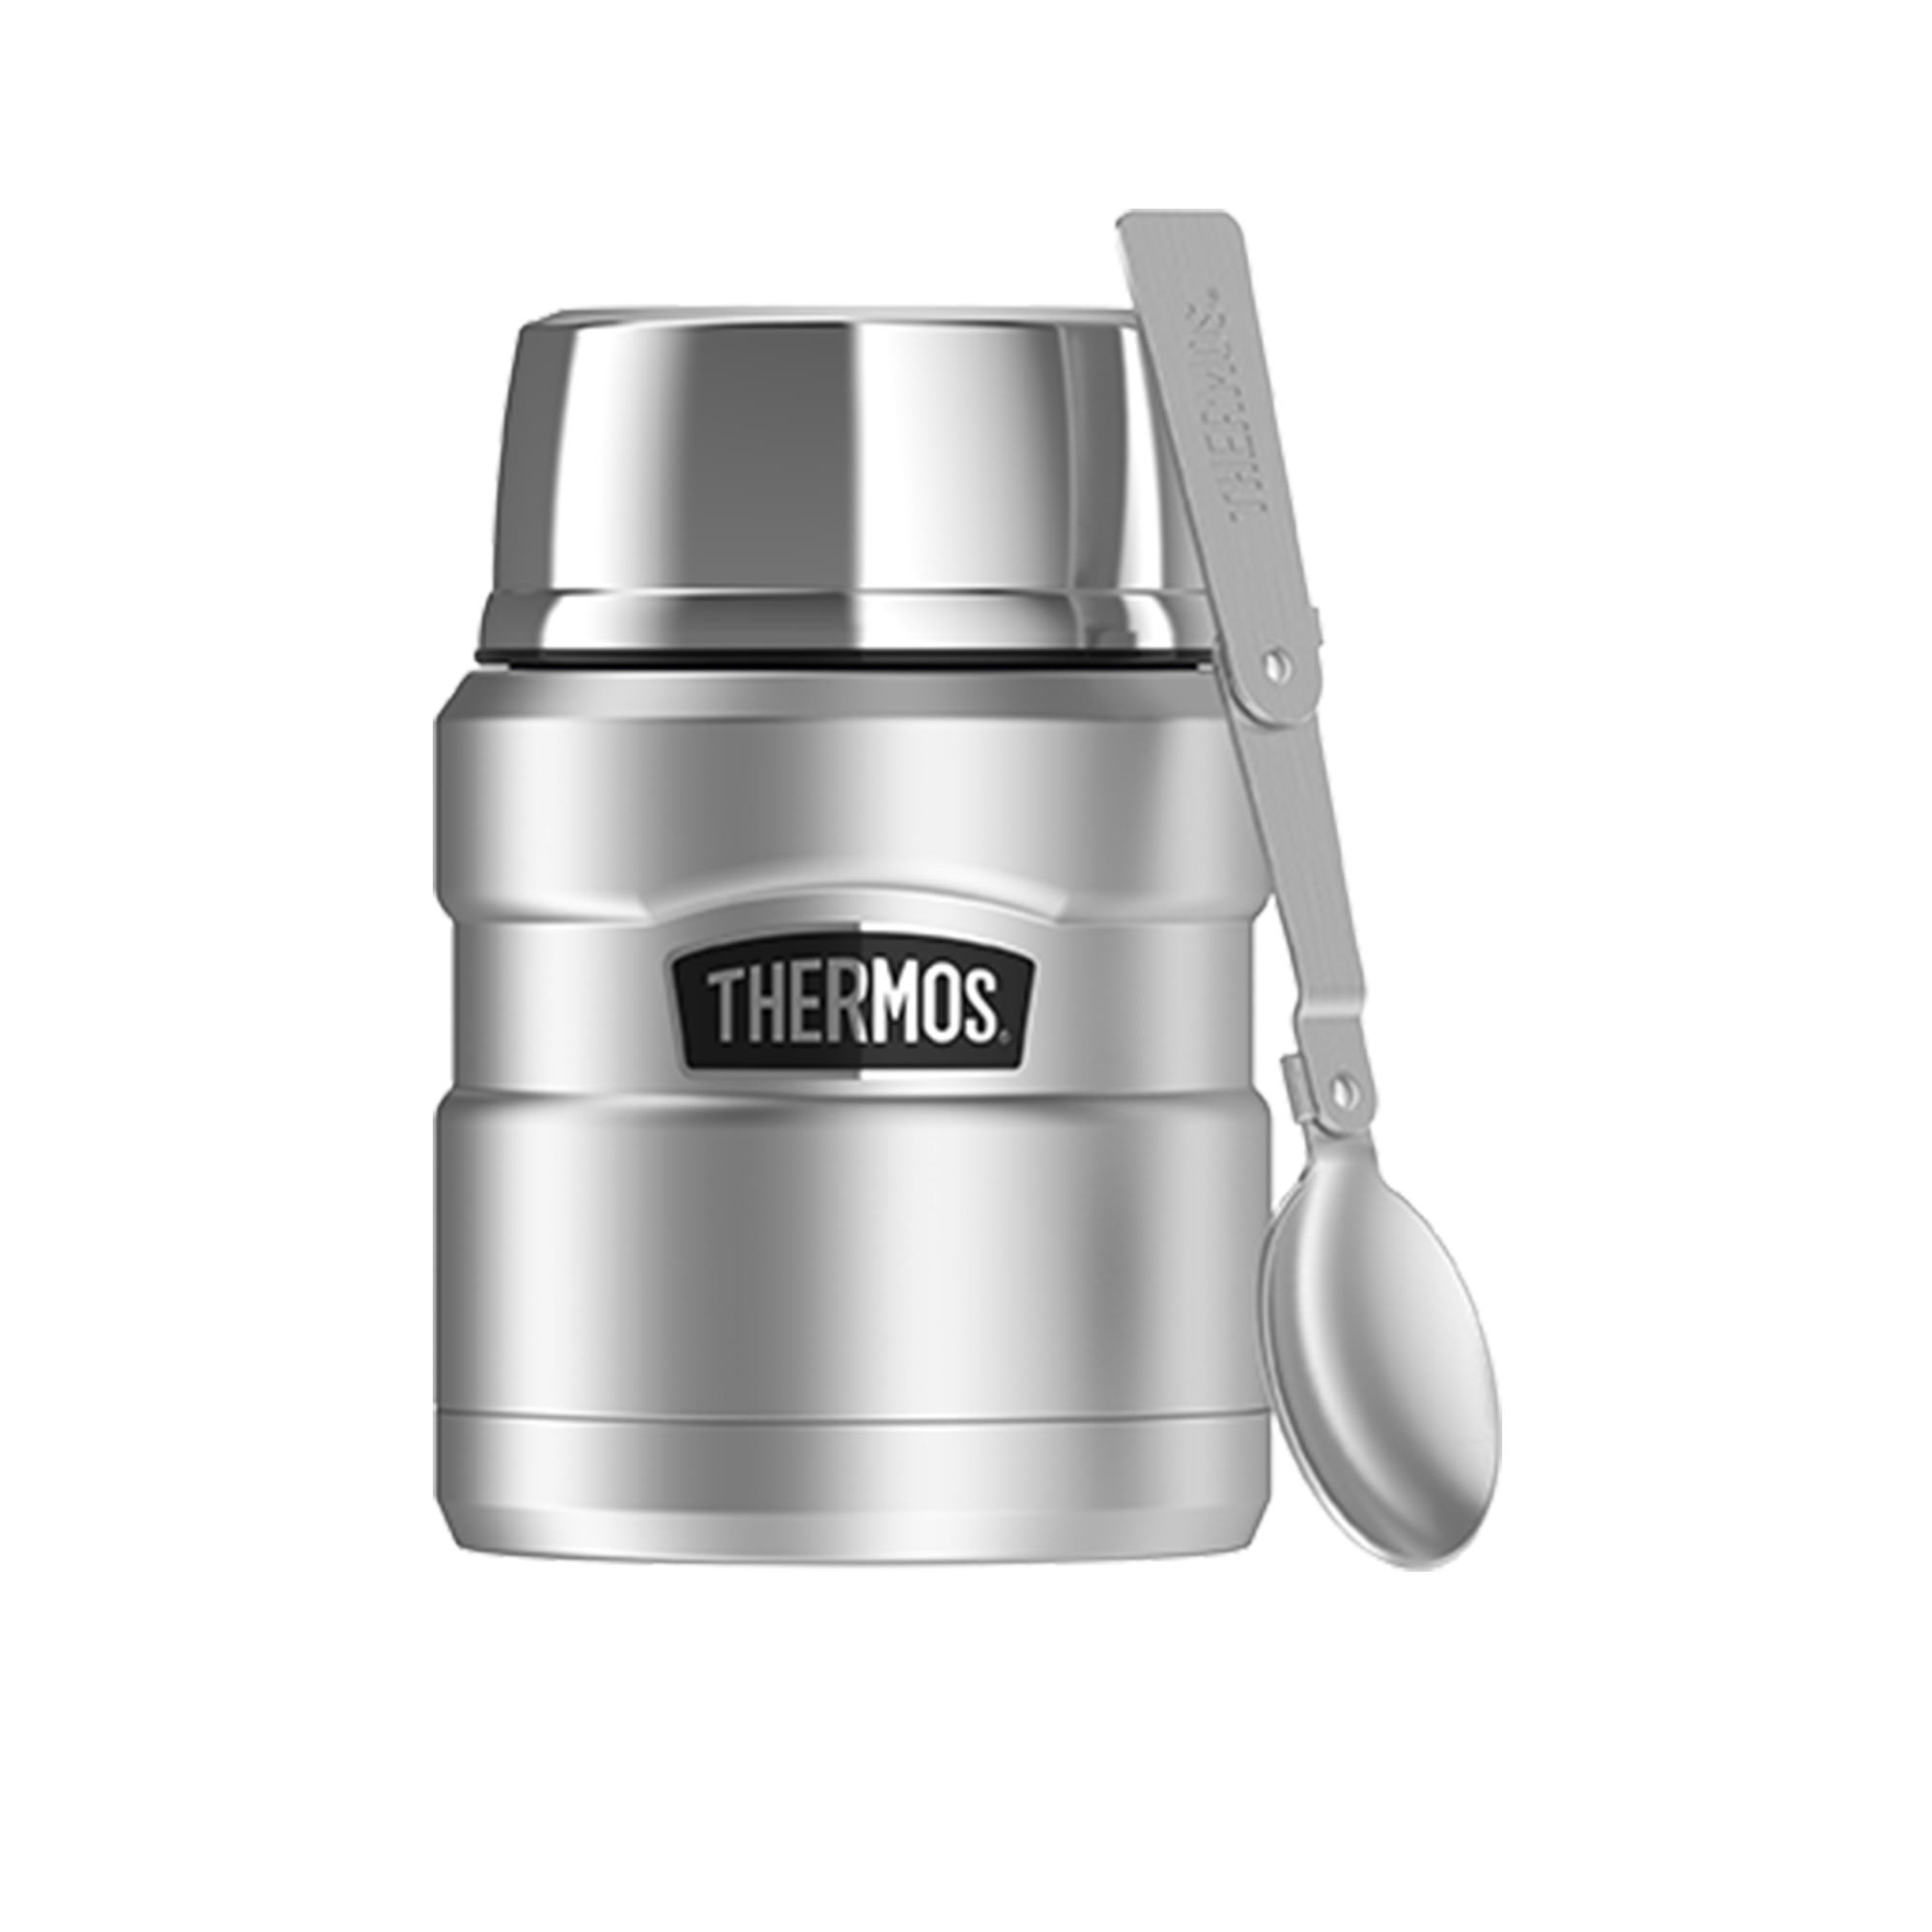 Thermos Stainless King Insulated Food Jar 470ml Stainless Steel Image 1